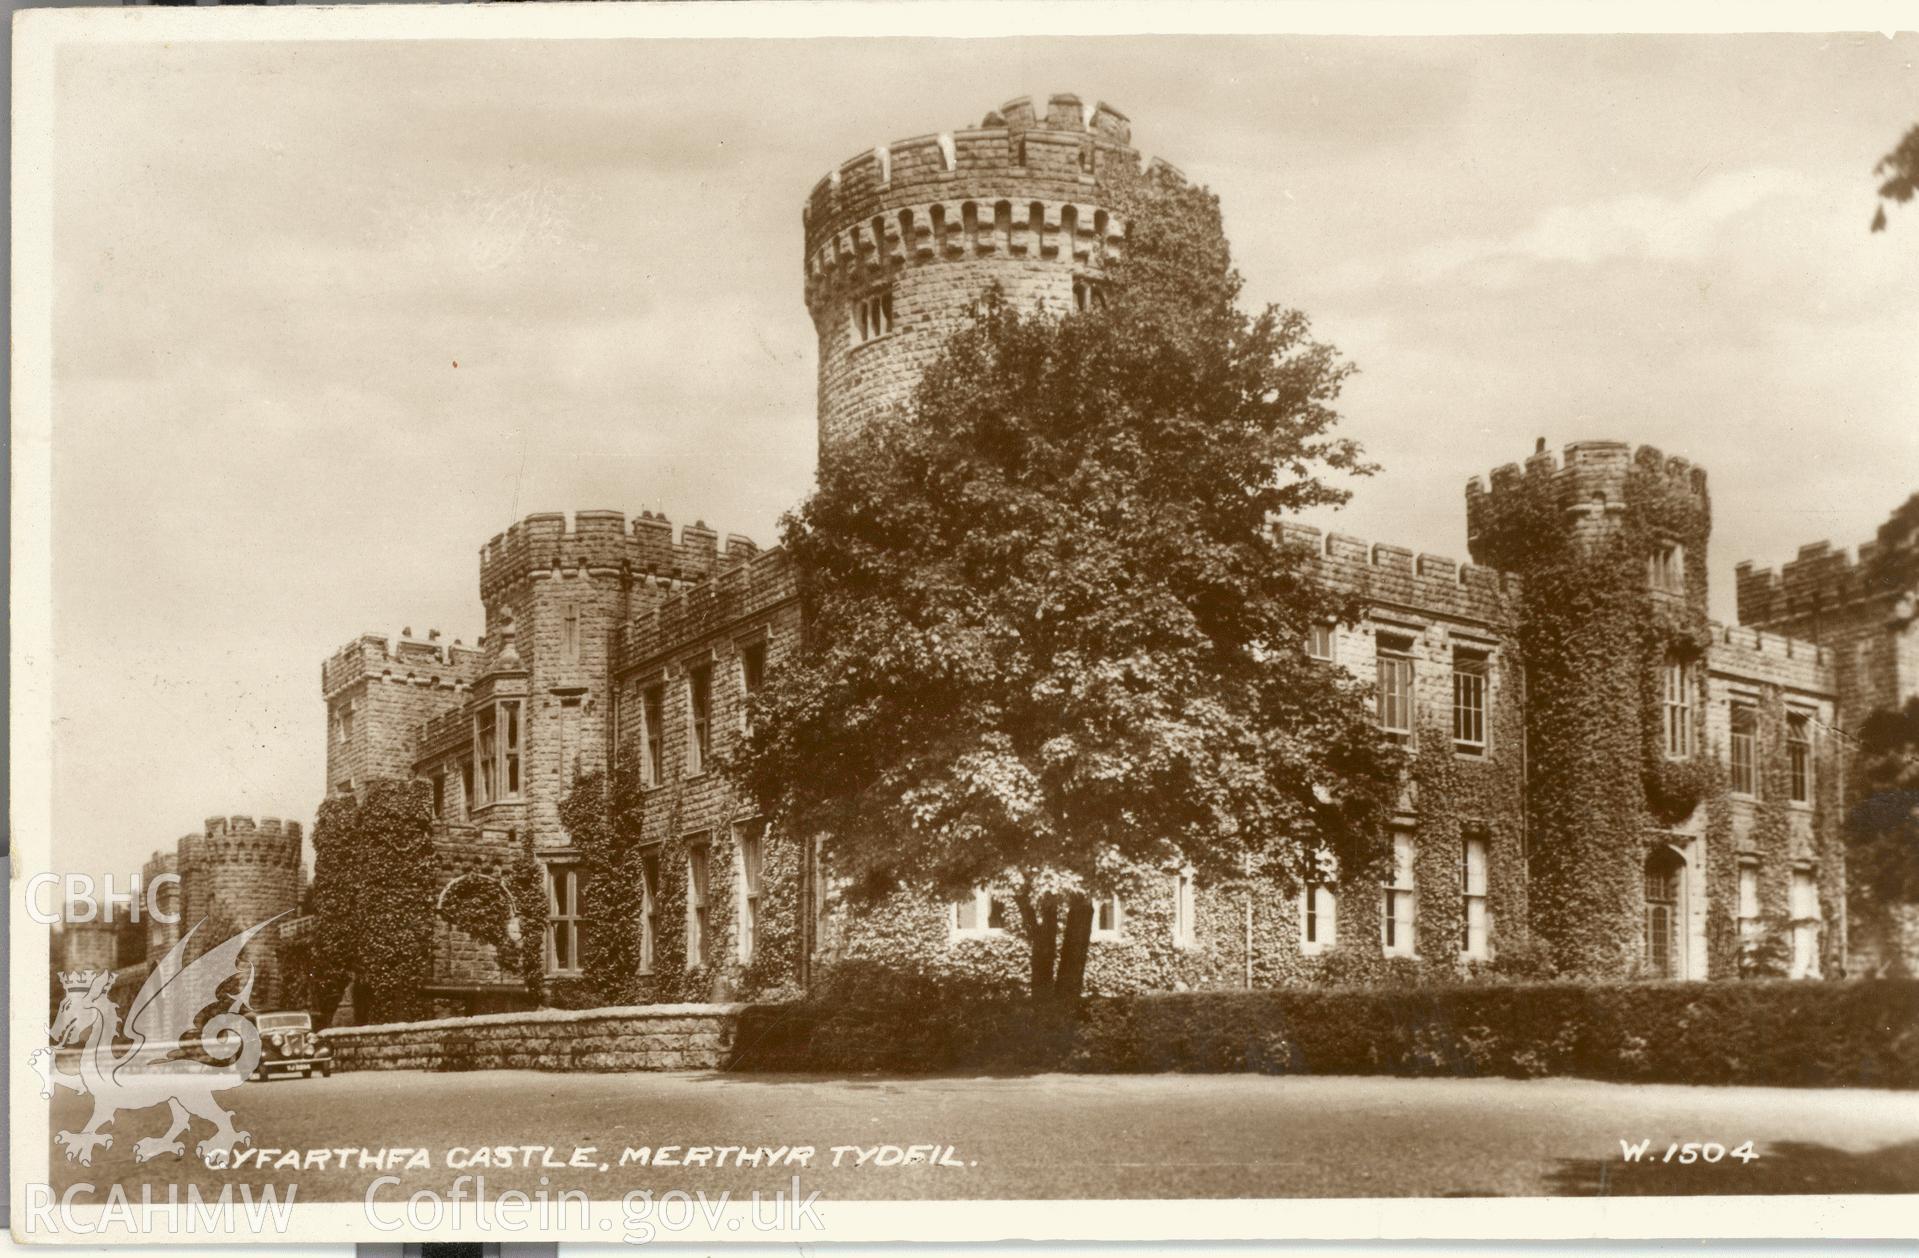 Digitised postcard image of Cyfarthfa Castle, Merthyr Tydfil, and car, Valentine and Sons Ltd. Produced by Parks and Gardens Data Services, from an original item in the Peter Davis Collection at Parks and Gardens UK. We hold only web-resolution images of this collection, suitable for viewing on screen and for research purposes only. We do not hold the original images, or publication quality scans.